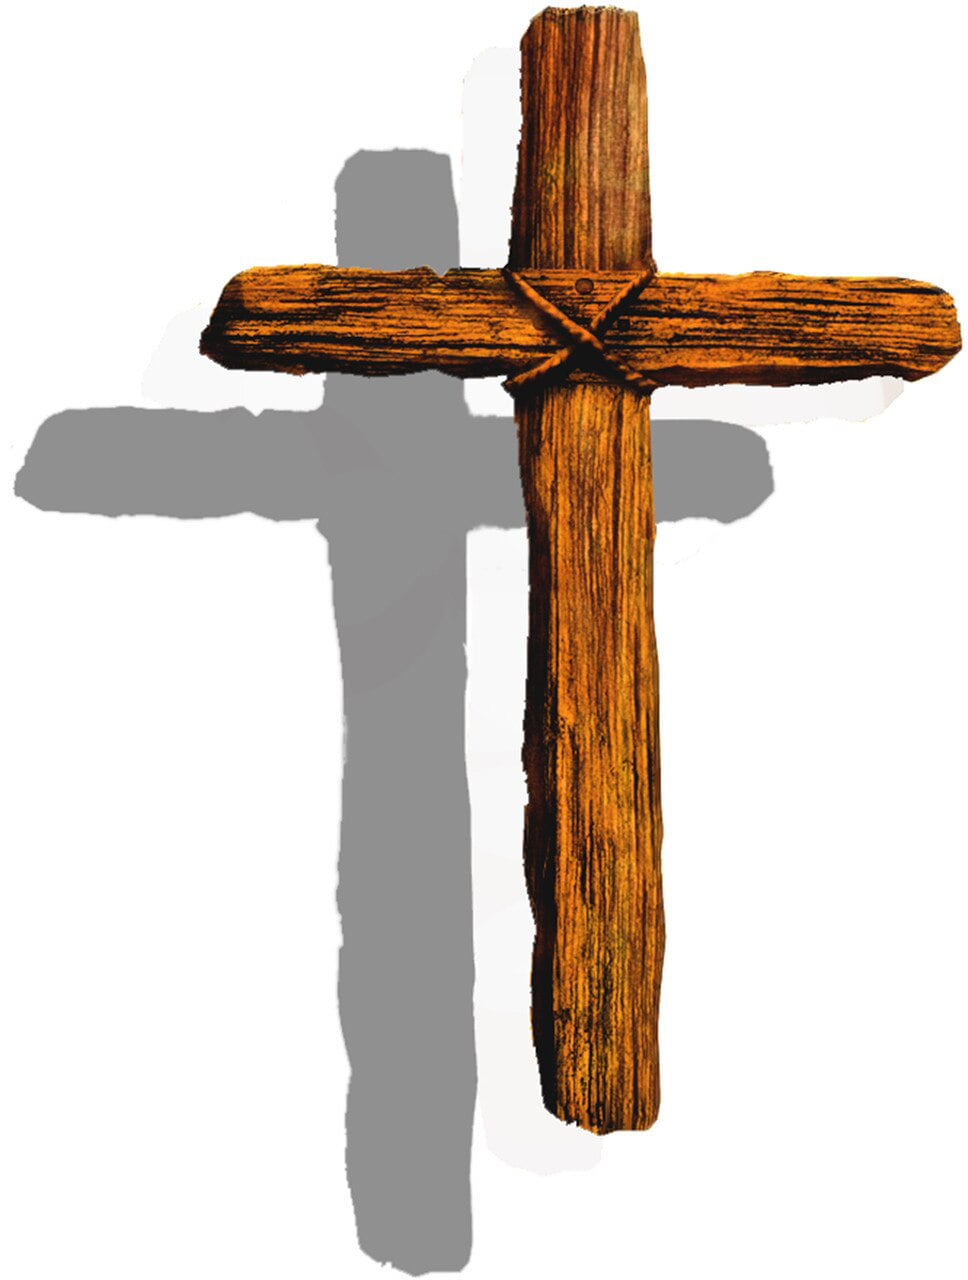 Wall-Ahhh!™ 3D Floating Old Wooden Cross Wall Decor Decal